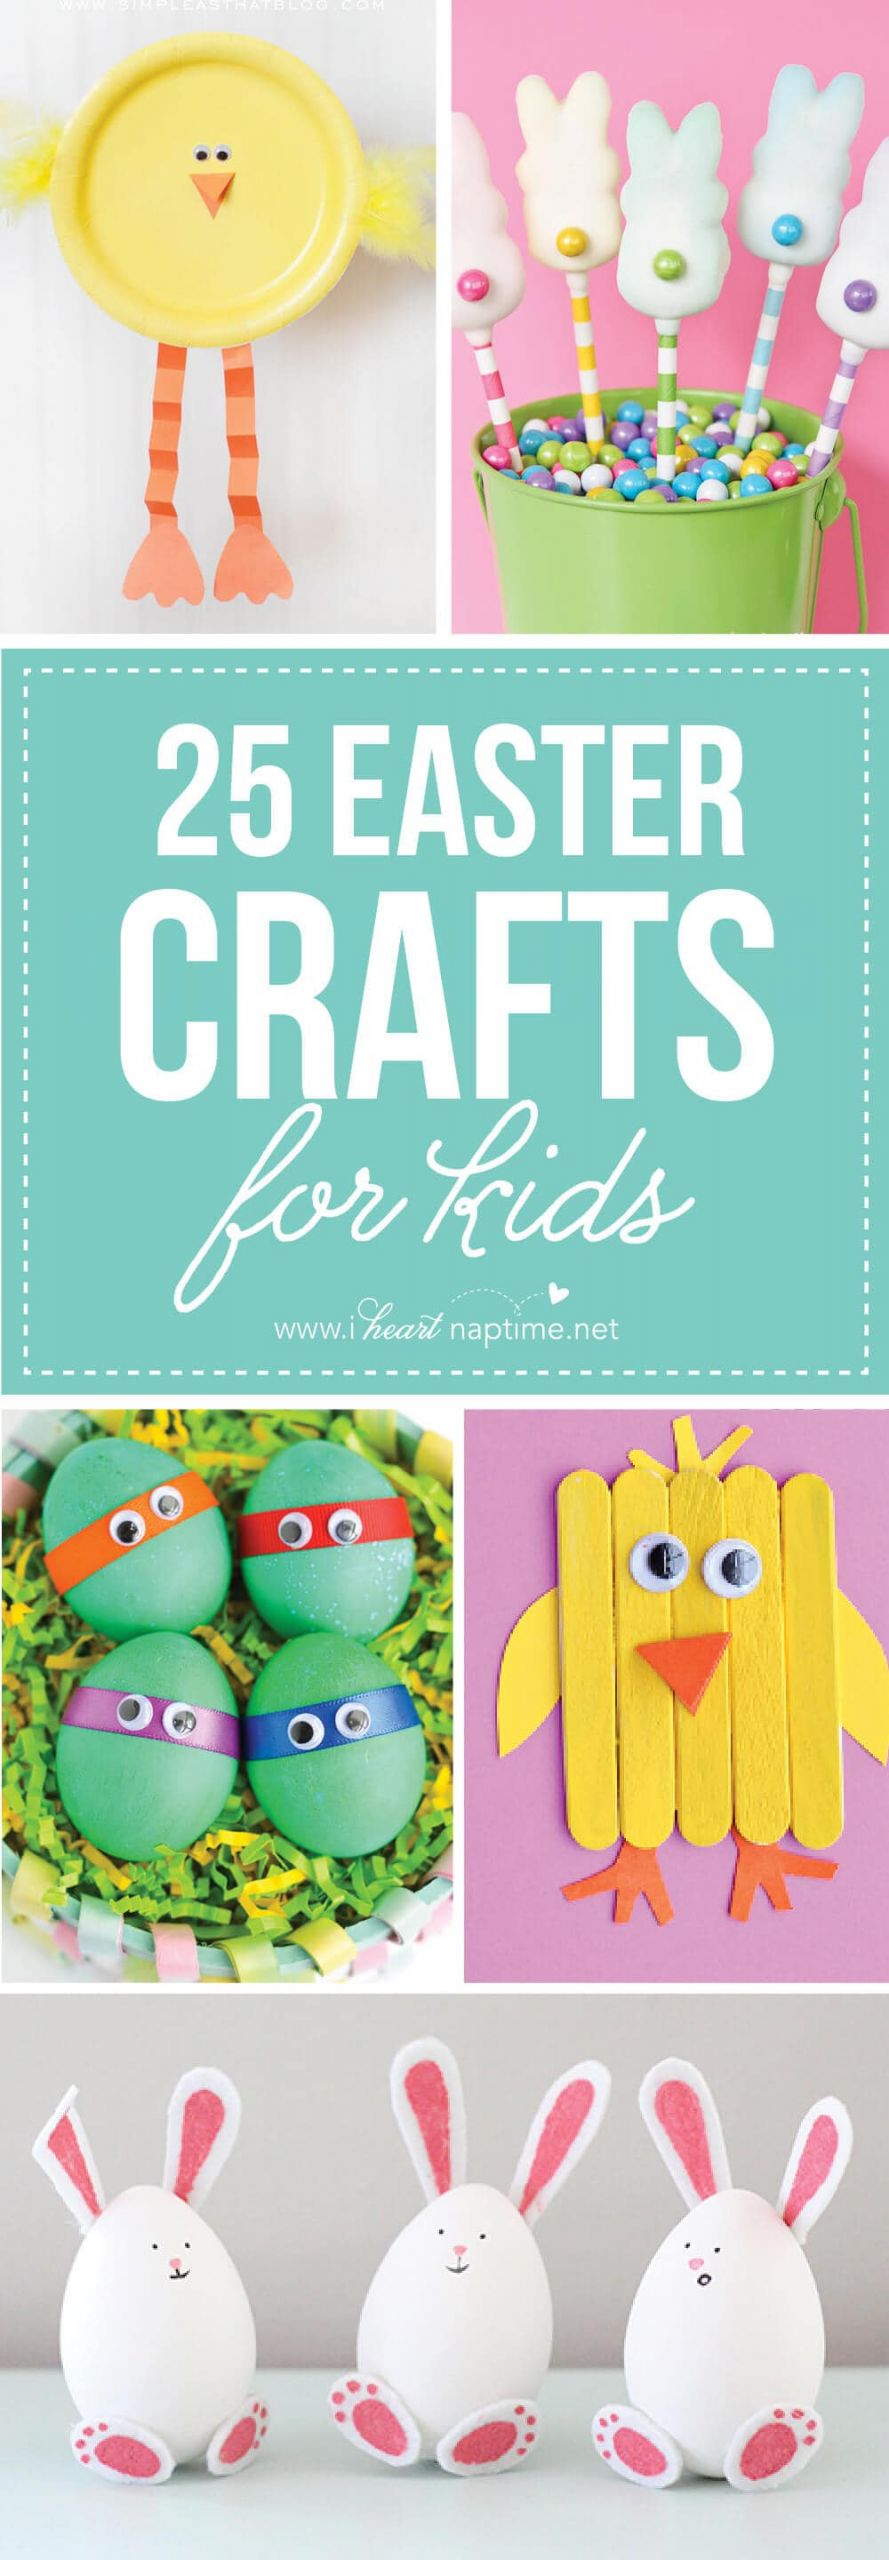 Fun Easter Activities
 25 Easter Crafts for Kids I Heart Nap Time